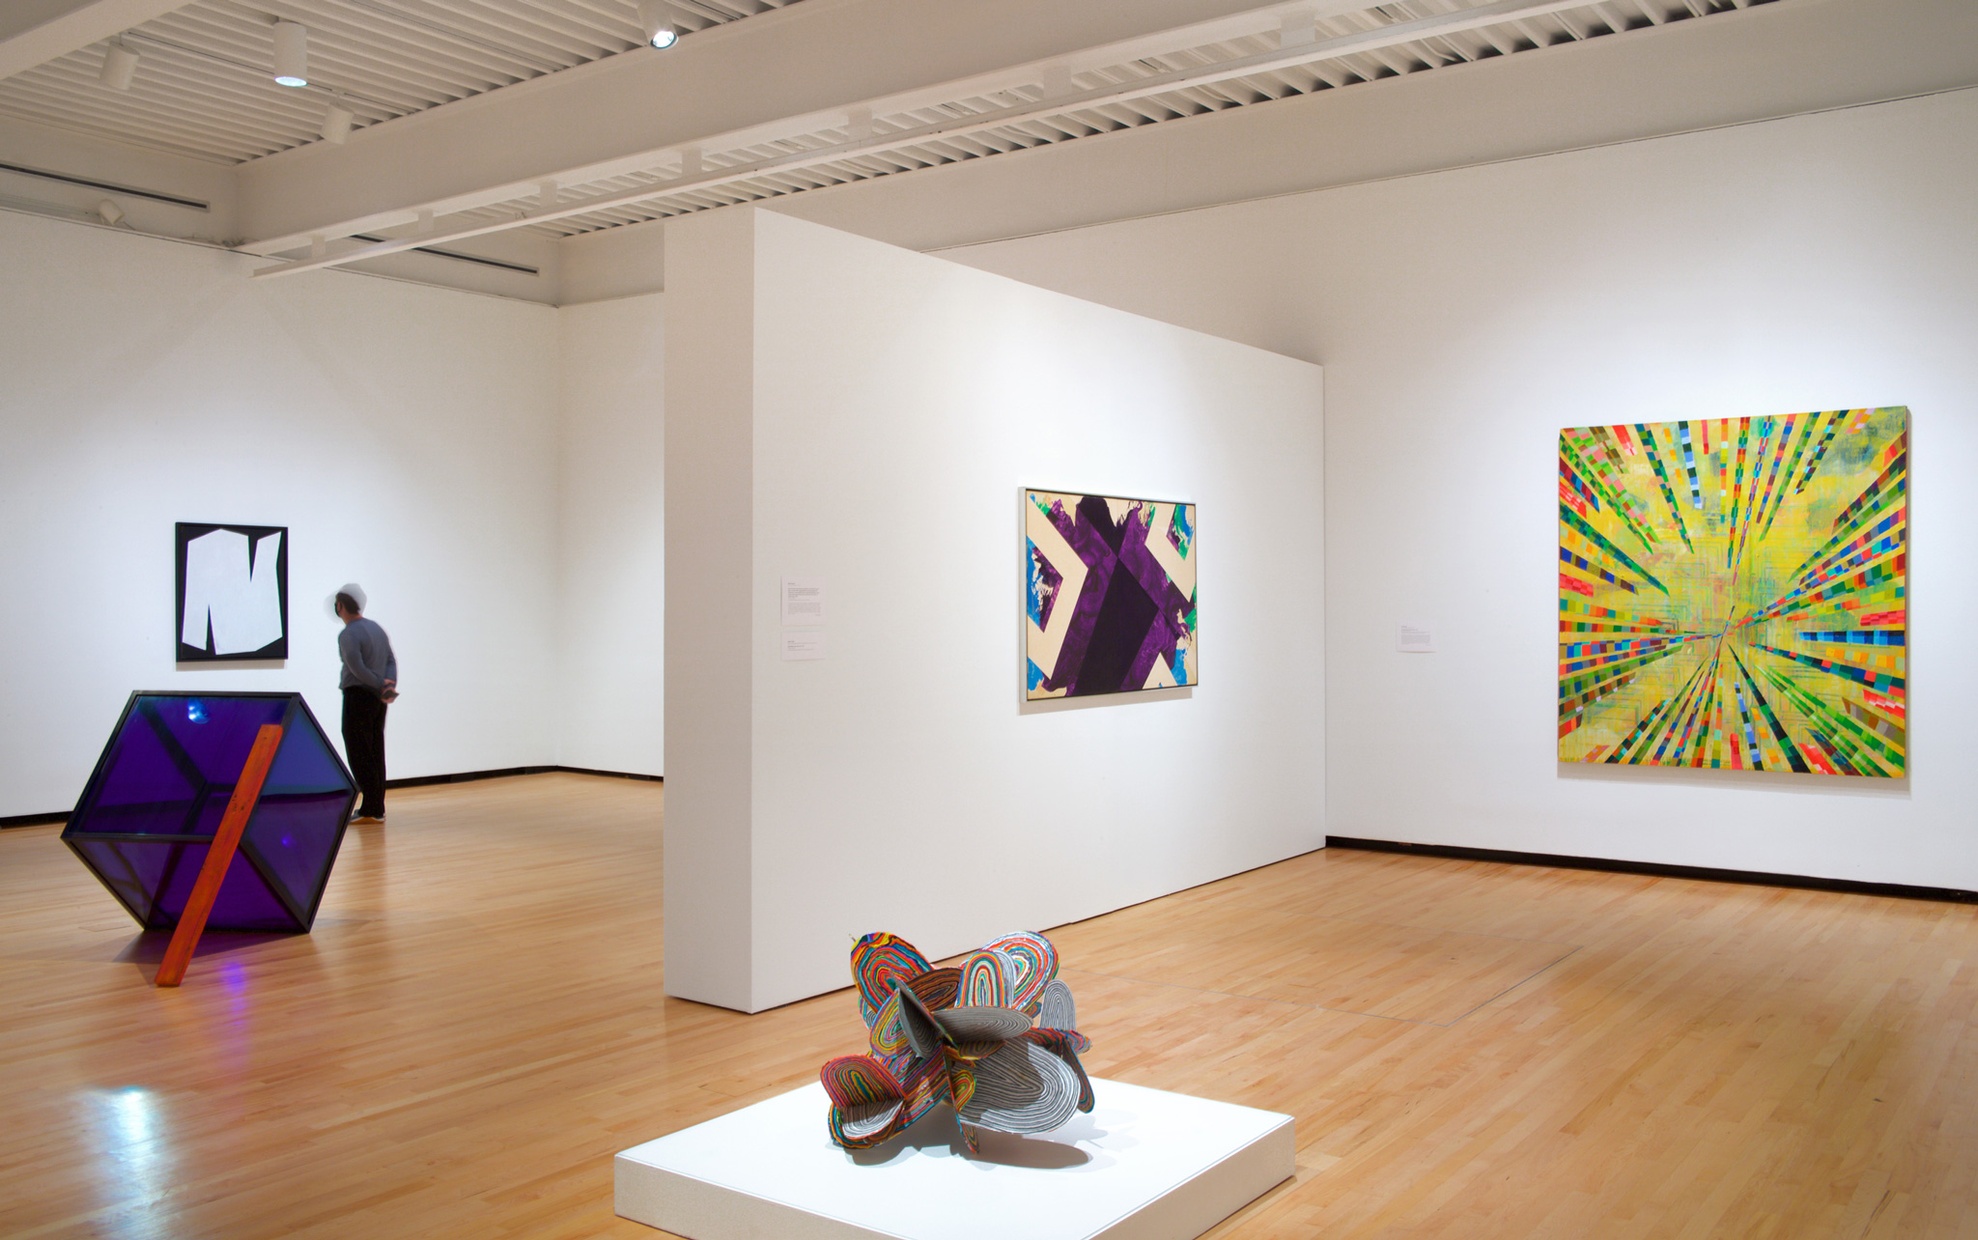 Colorful artwork hangs on white walls in a large room with sculptures sitting on both a pedestal and directly on the wood floors.